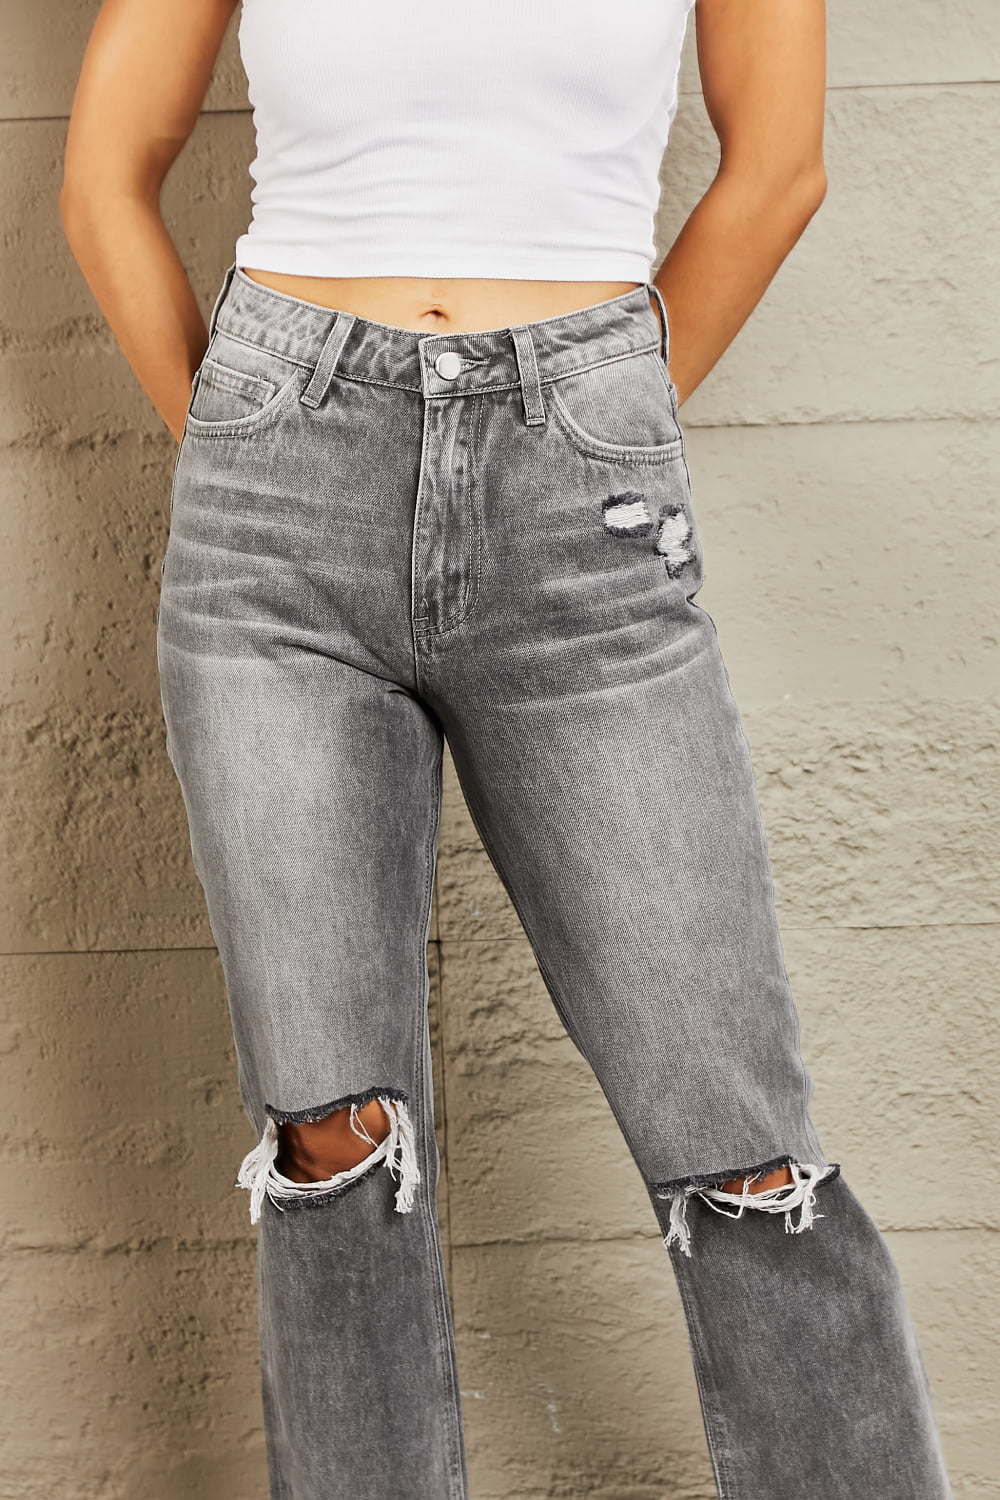 BAYEAS Stone Wash Distressed Cropped Straight Jeans - Alonna's Legging Land